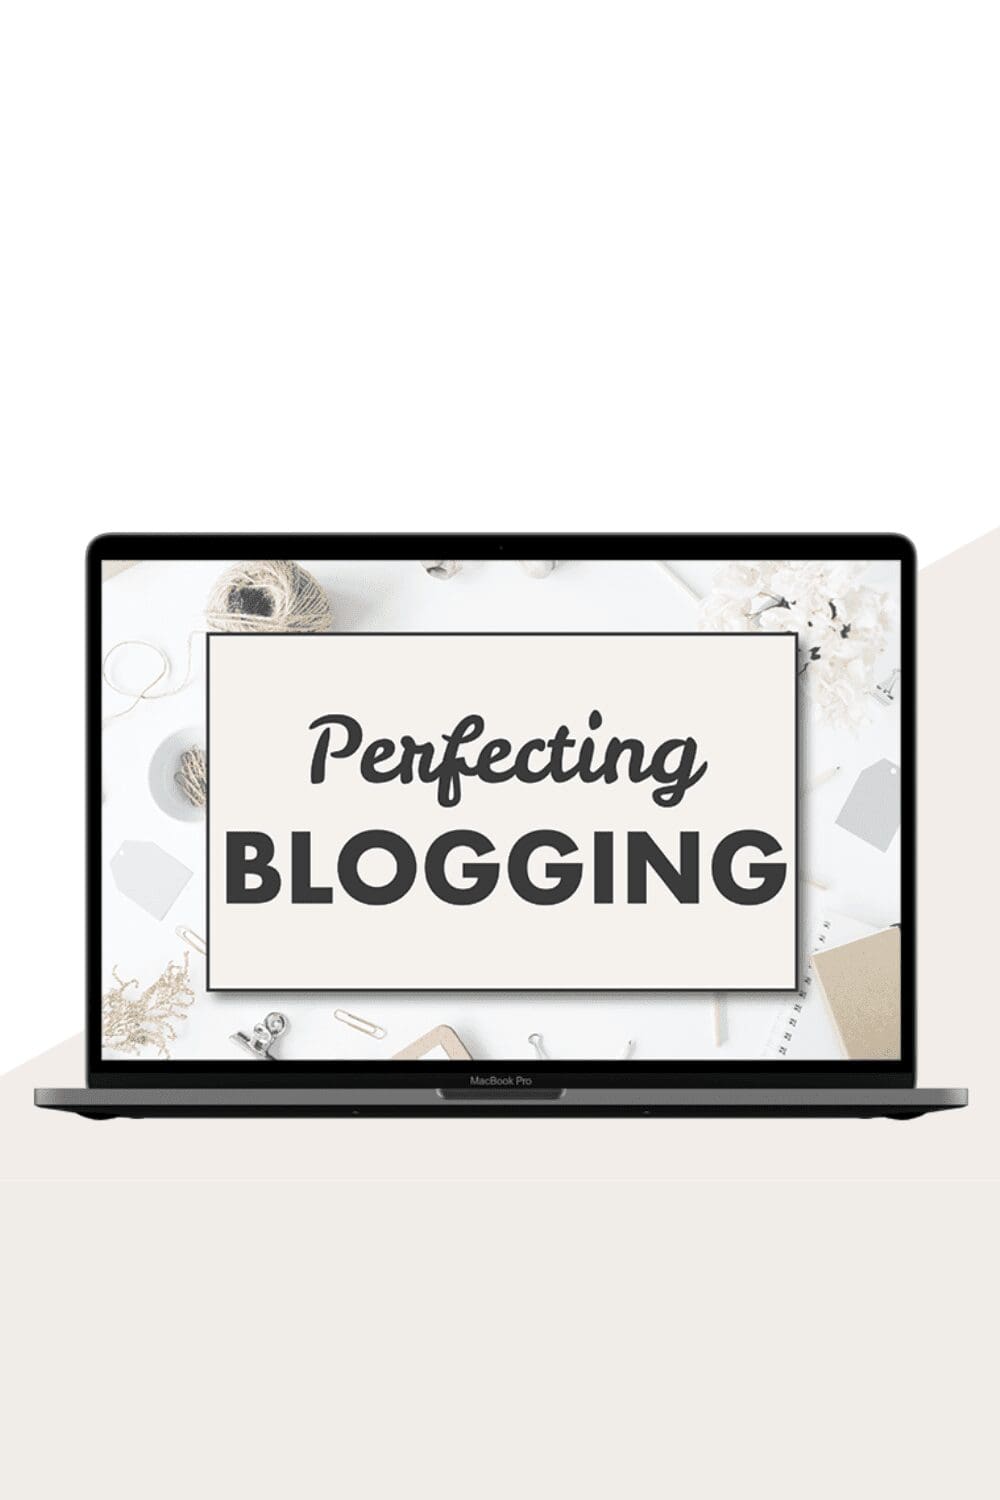 perfecting blogging course review